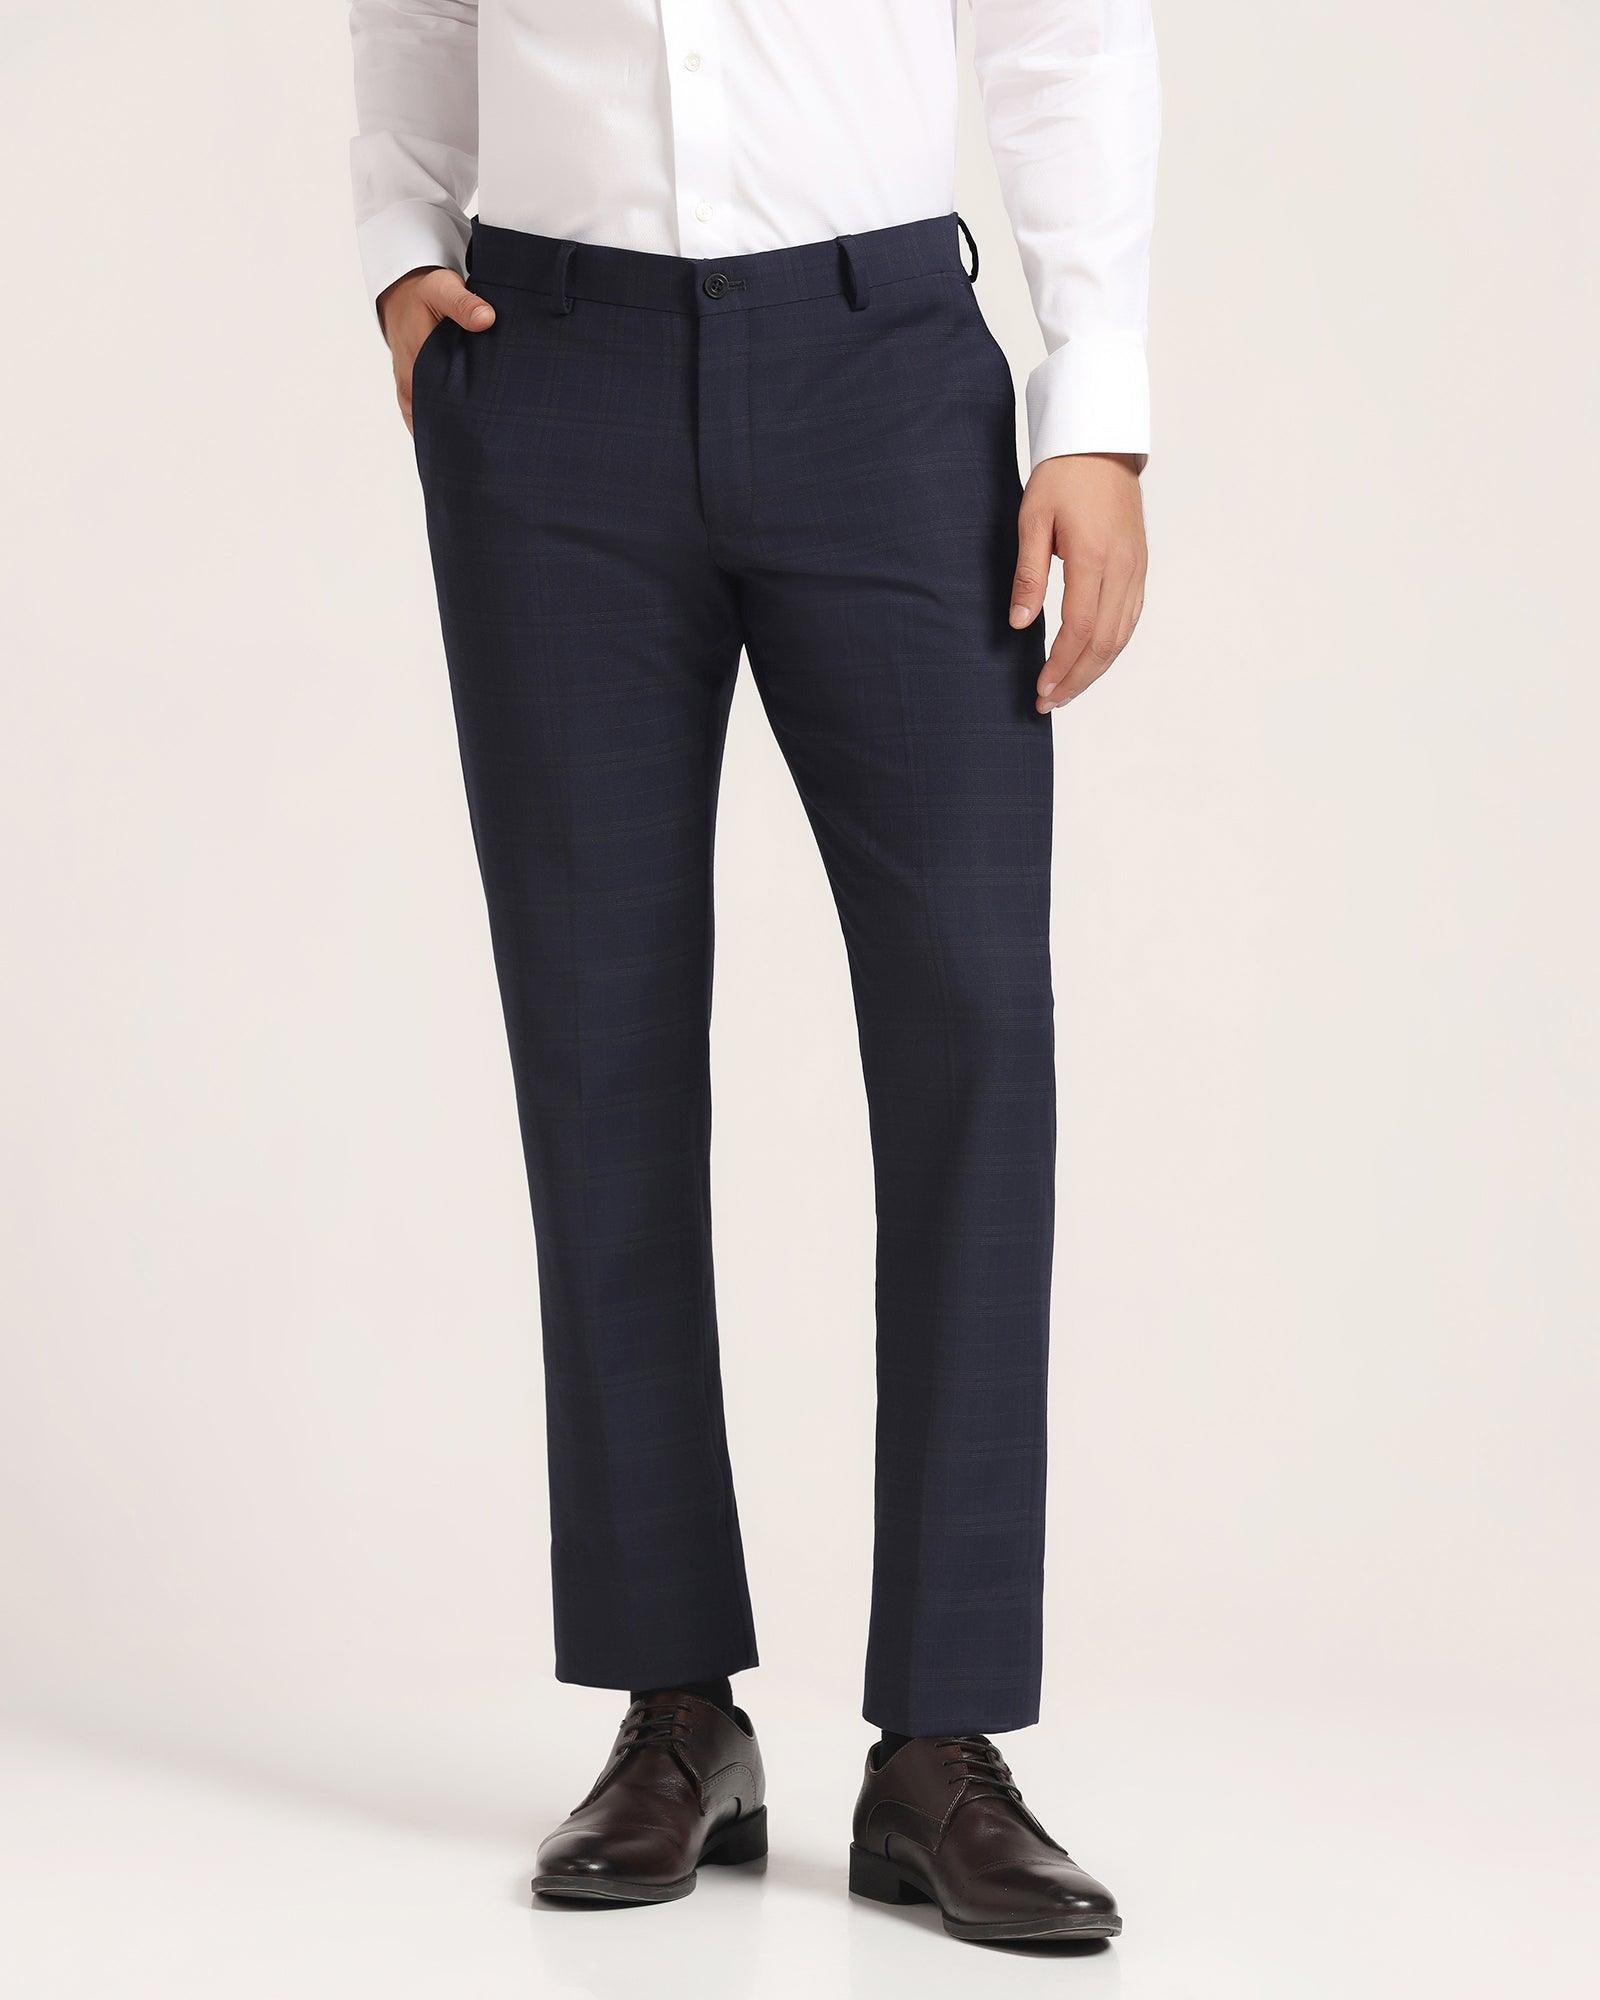 Luxe Slim Comfort B-95 Formal Navy Check Trouser - Maurice